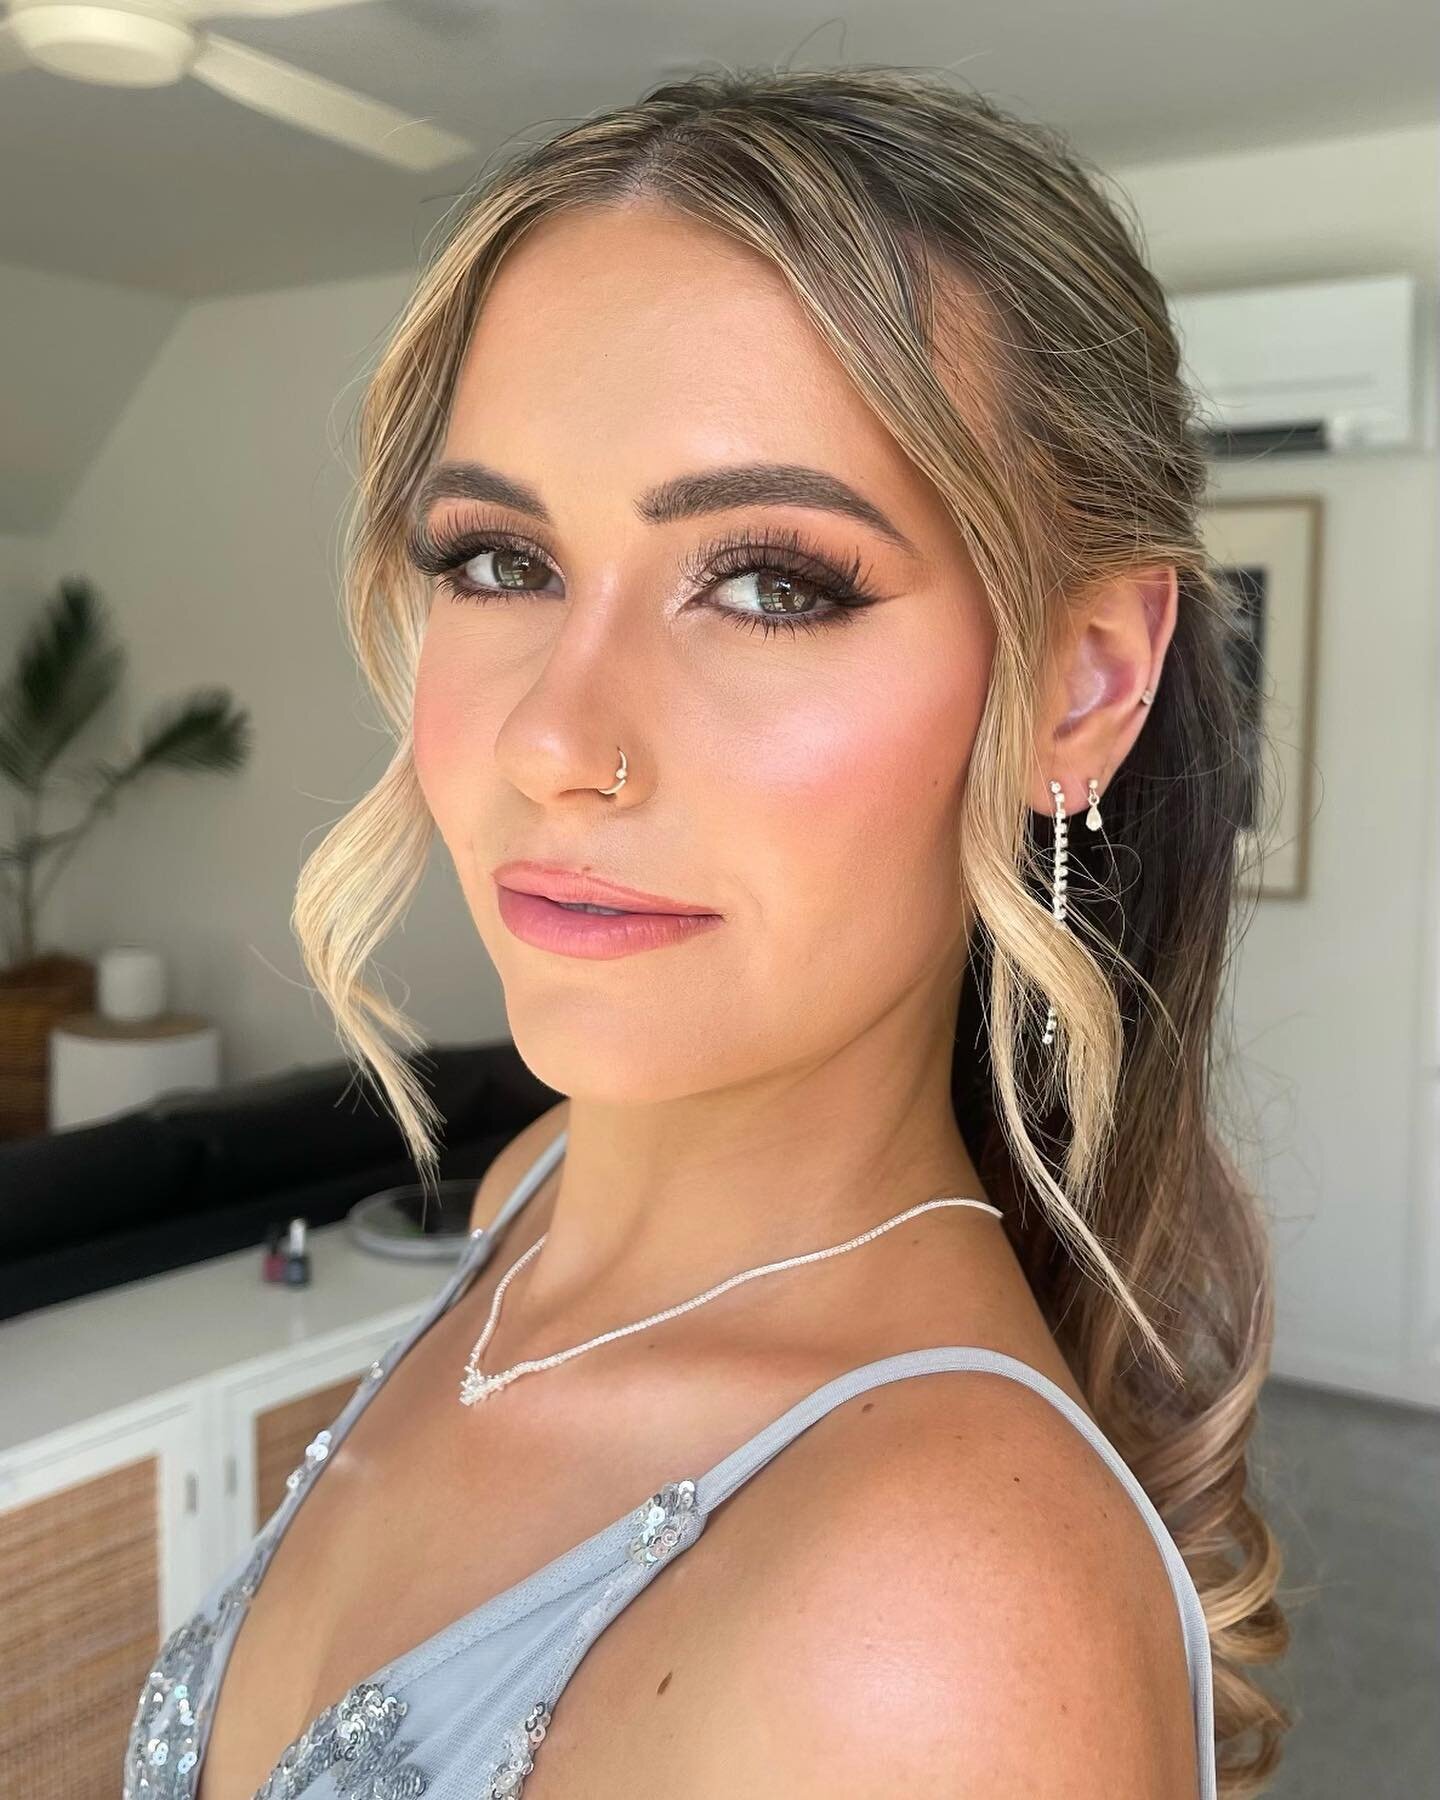 About time I posted my gorg niece from last year for her Year 12 formal. What a stunner x
.
.
.
#byronbay #byronbaymakeupartist #goldcoastmakeupartist #kingscliffmakeupartist #formalmakeup #events #makeup #byronbayevents #goldcoast #tweedcoastmakeupa